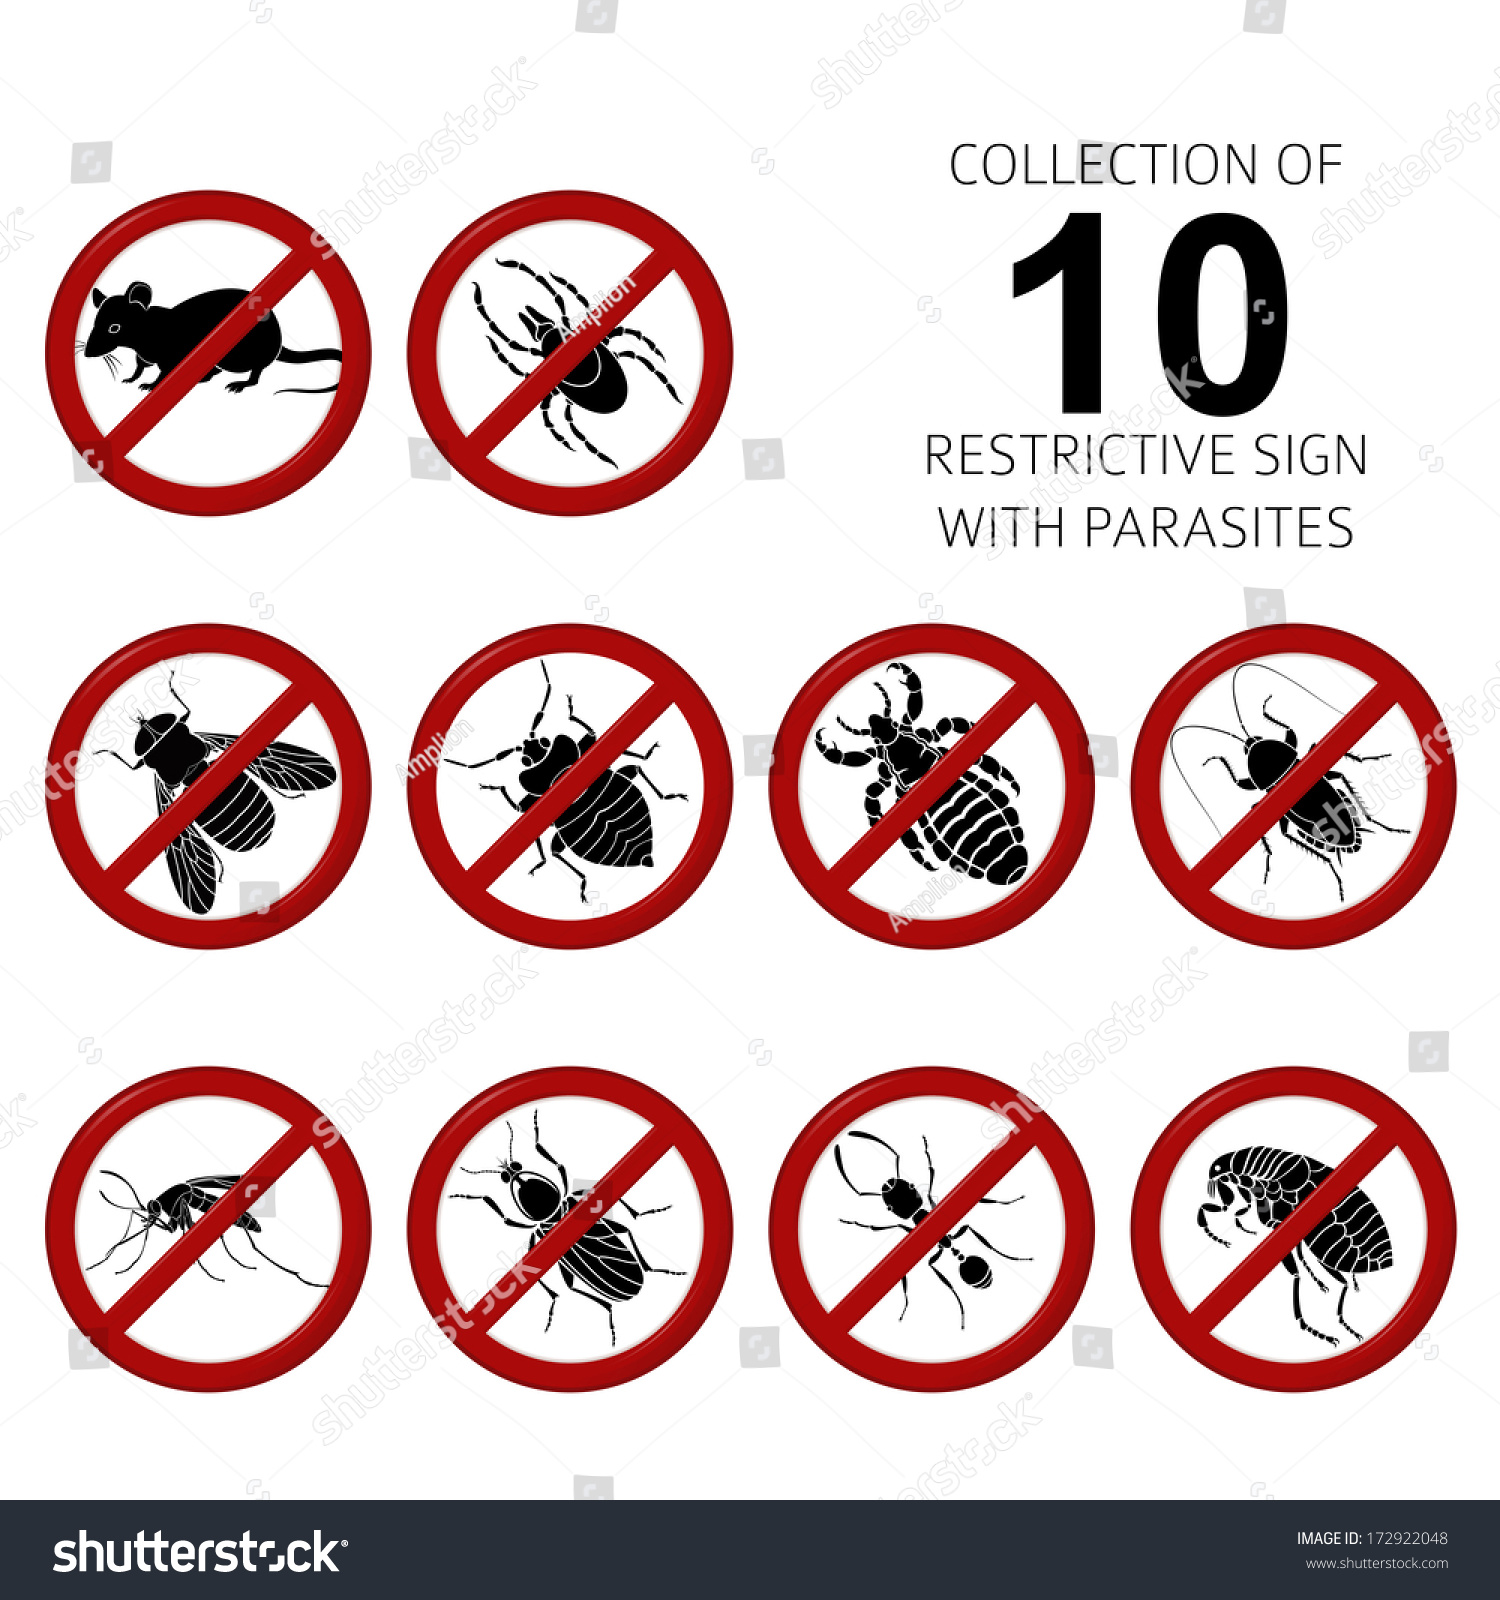 Vector Collection Image 10 Parasites Stock Vector 172922048 - Shutterstock